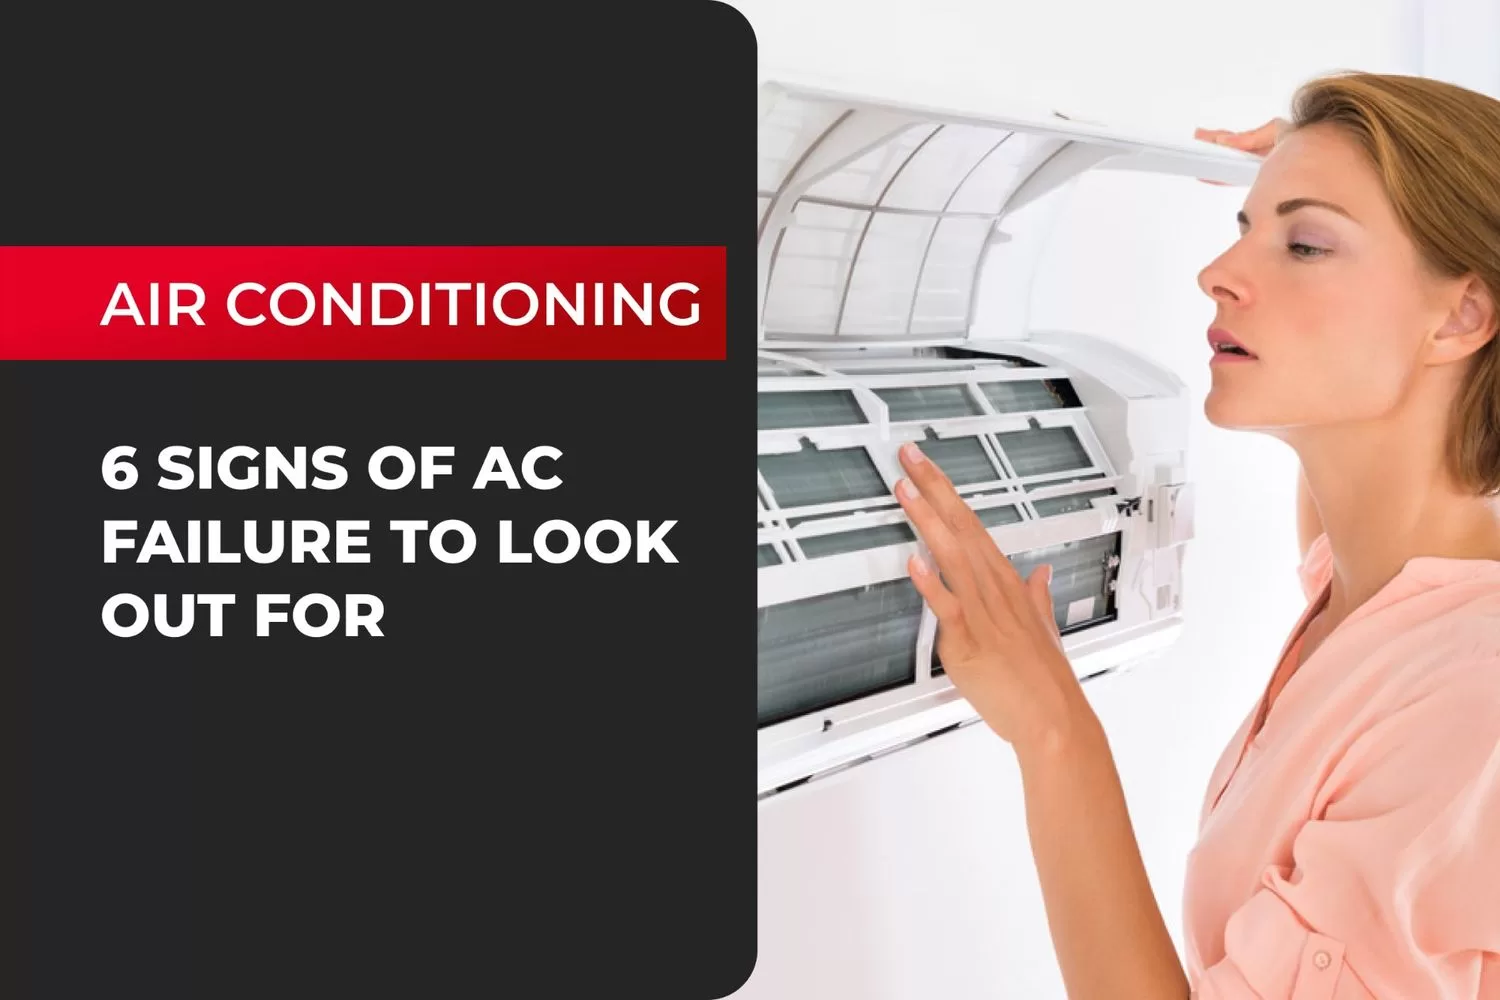 6 Signs of AC Failure to Look Out For